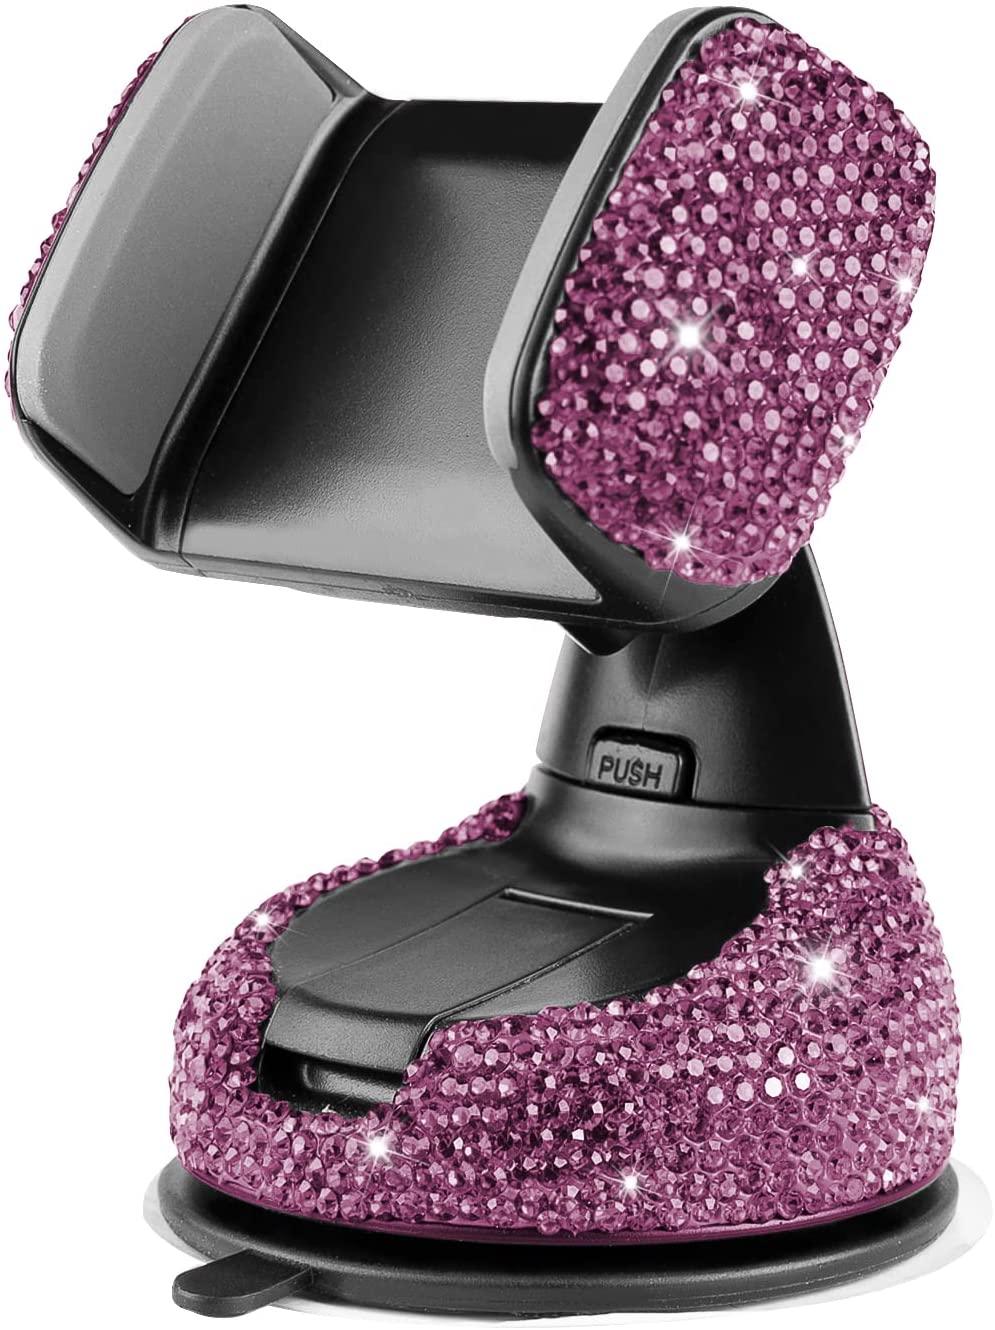 Car Phone Mount Cell Phone Holder with One More Air Vent Base,Bling Crystal Universal Phone Mount Holder Cradle for Dashboard - Lasercutwraps Shop